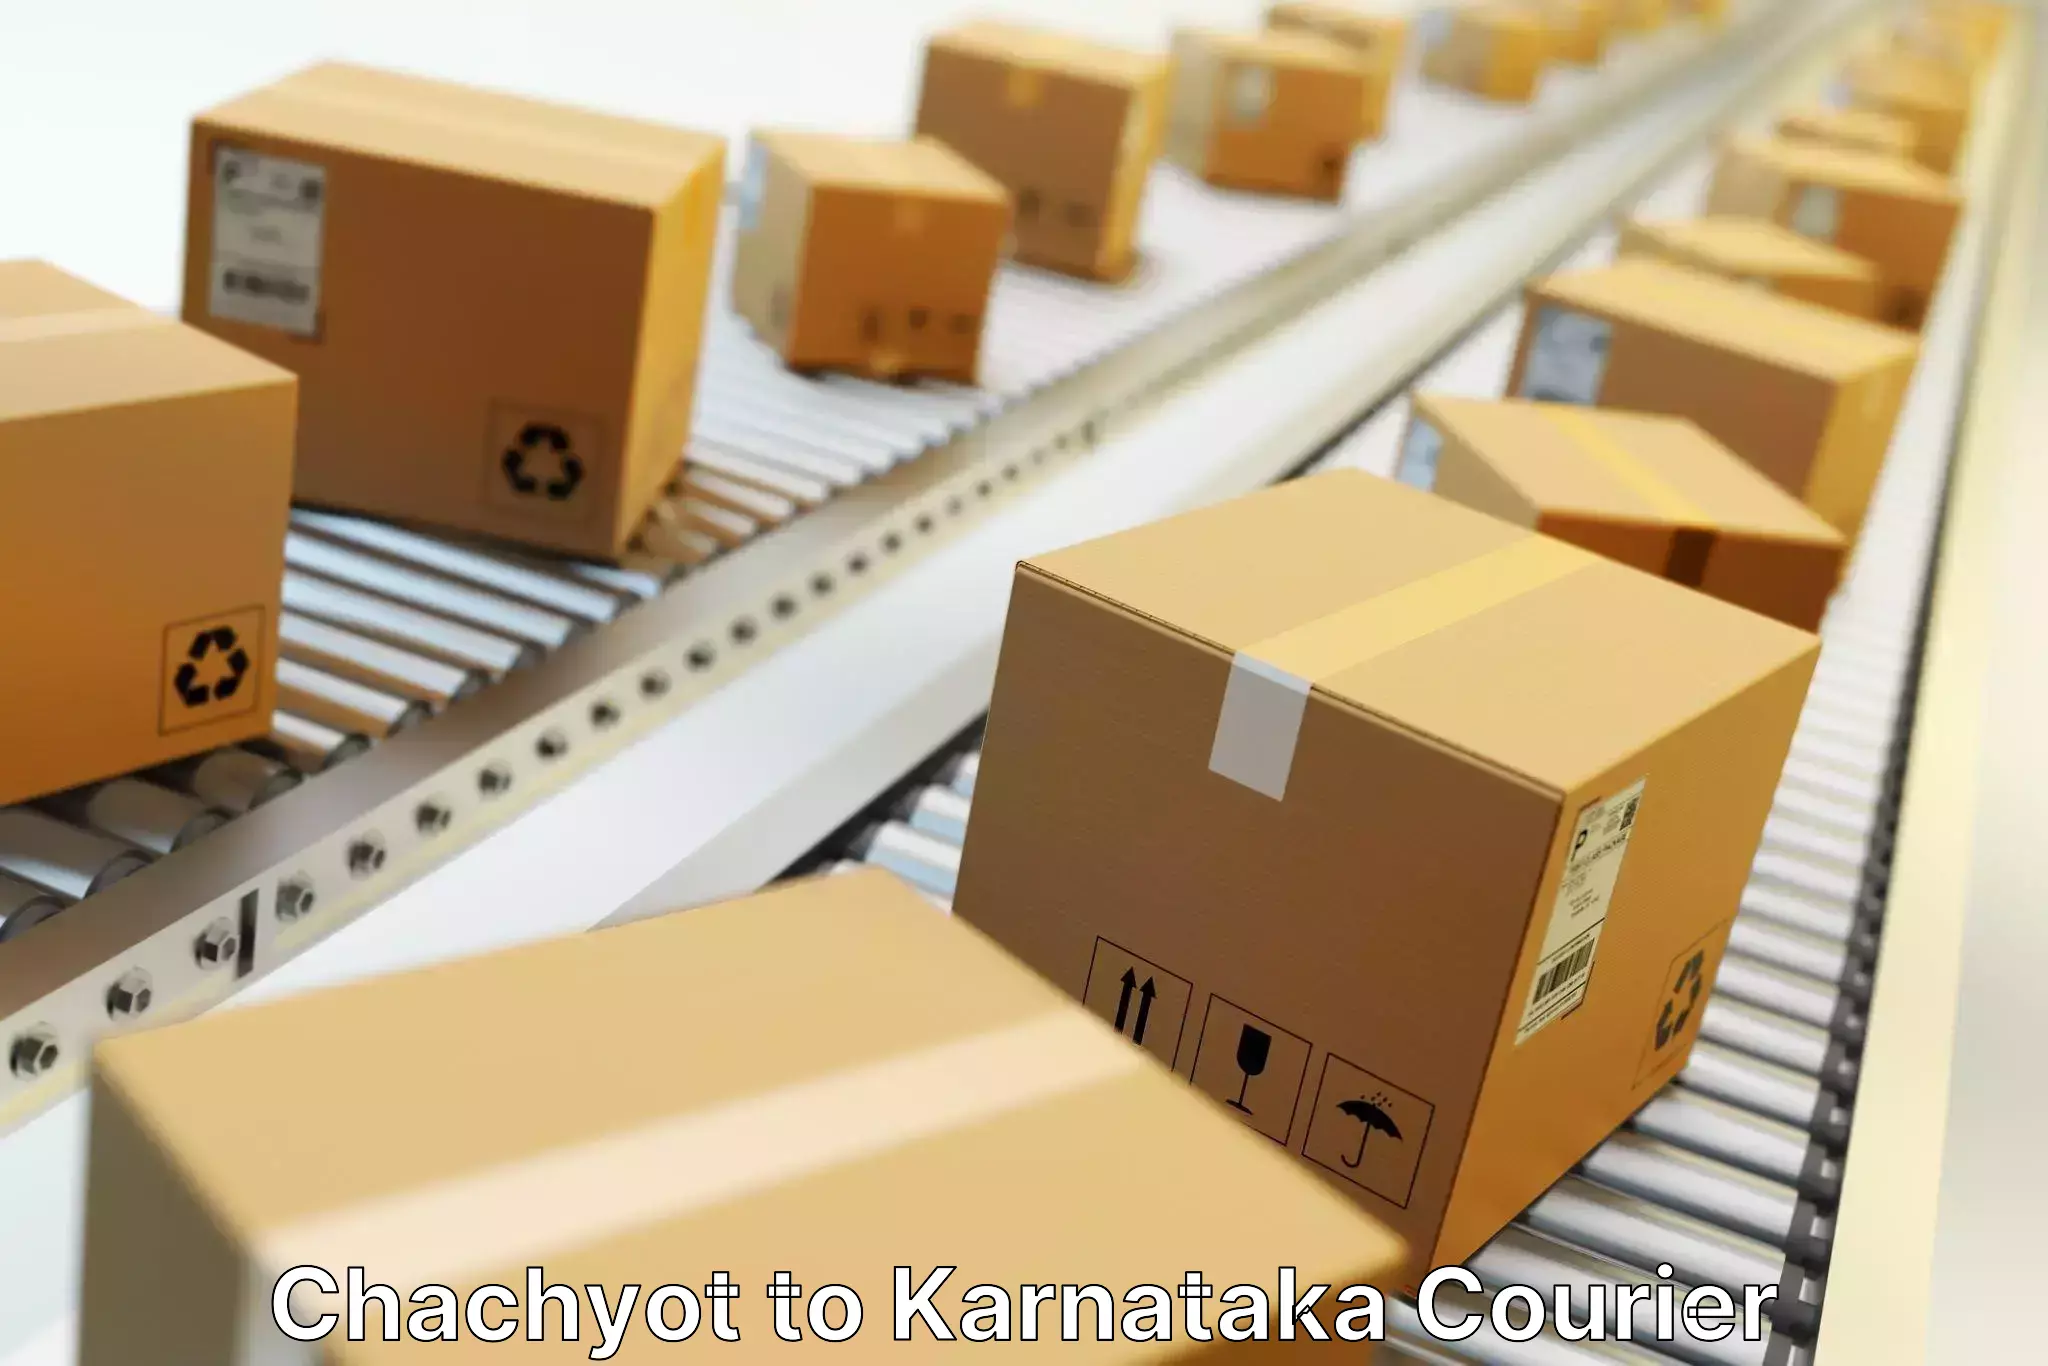 Express package handling Chachyot to Mangalore Port